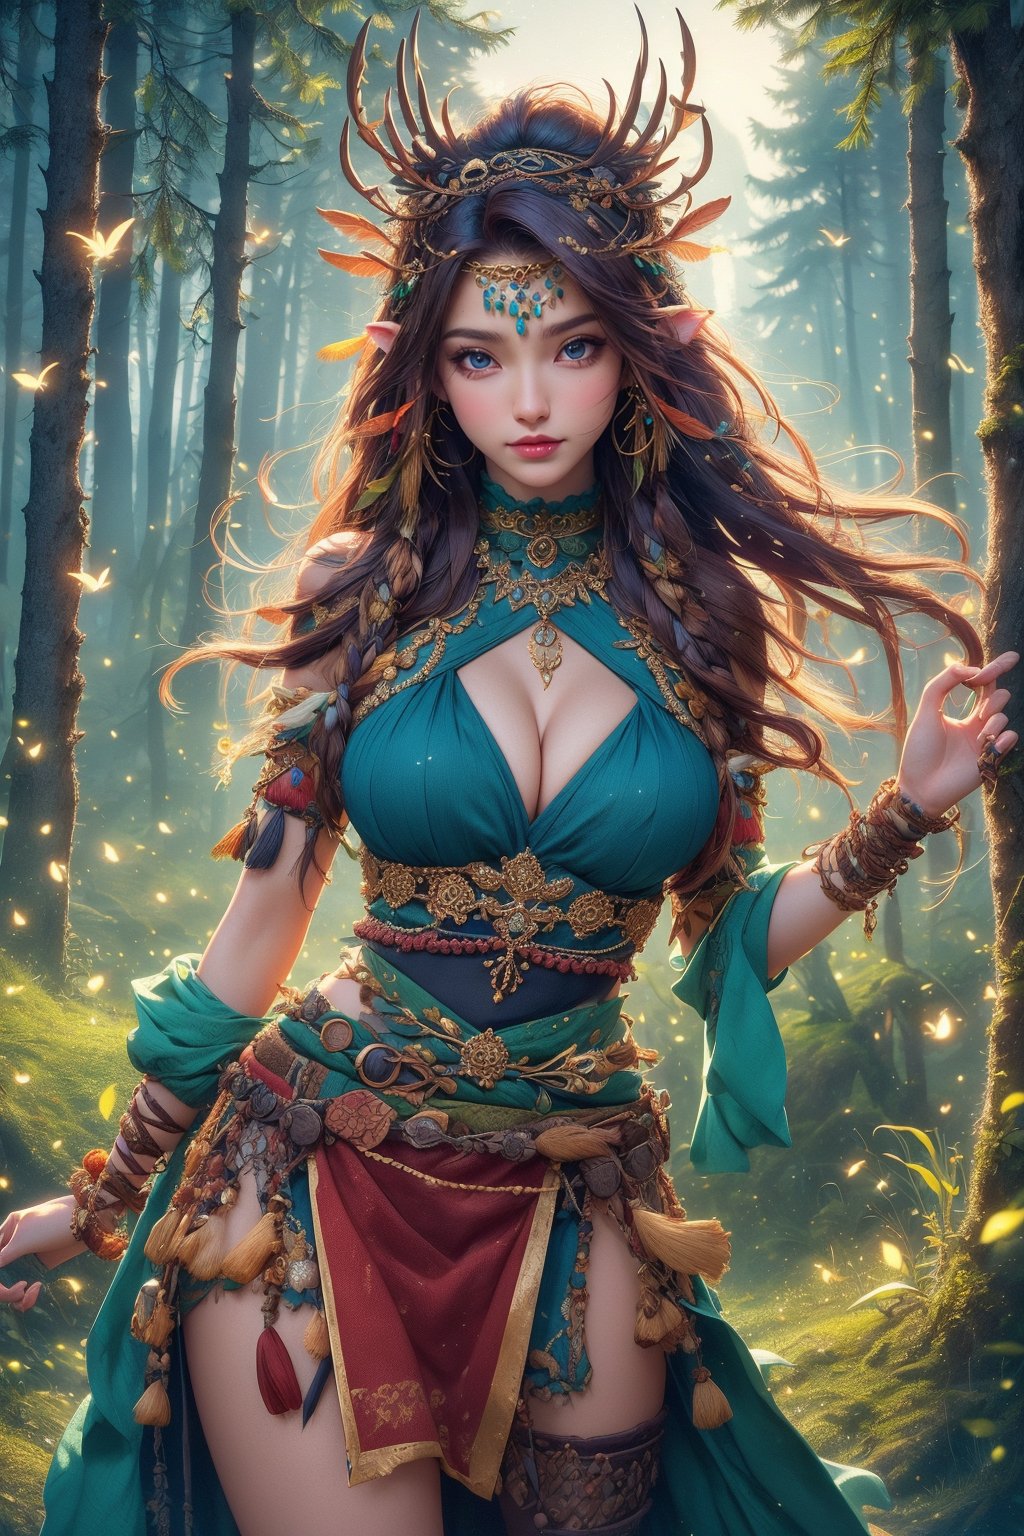 busty and sexy girl, Tribal girl, feather headdress 8k, masterpiece, ultra-realistic, best quality, high resolution, high definition,  the character should be a mischievous forest spirit, LOW-CUT SEXY DRESS, leaves woven into their hair. The background should be a moonlit forest clearing, with fireflies dancing in the air. The overall mood should be mysterious and enchanting, inviting viewers to explore the hidden magic of the woods